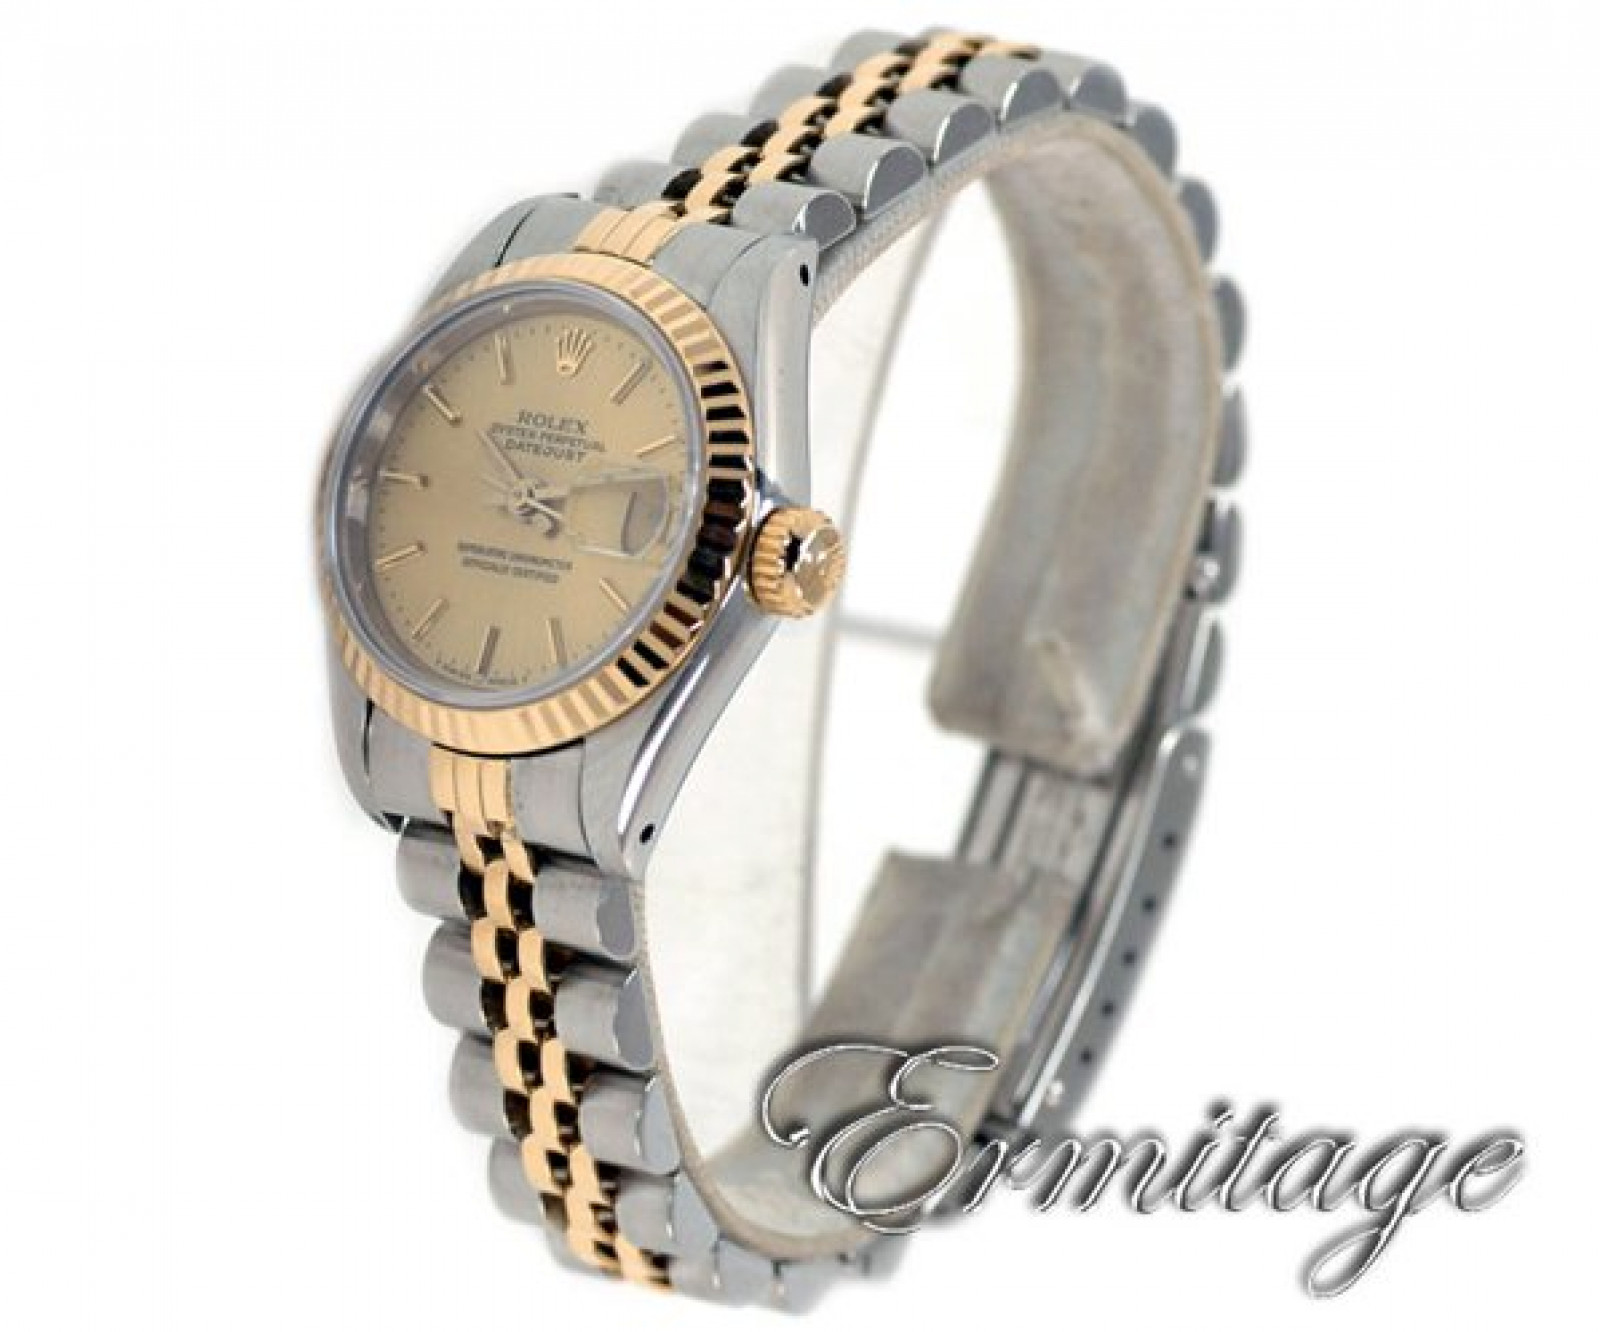 Pre-Owned Gold & Steel Rolex Datejust 69173 Year 1988